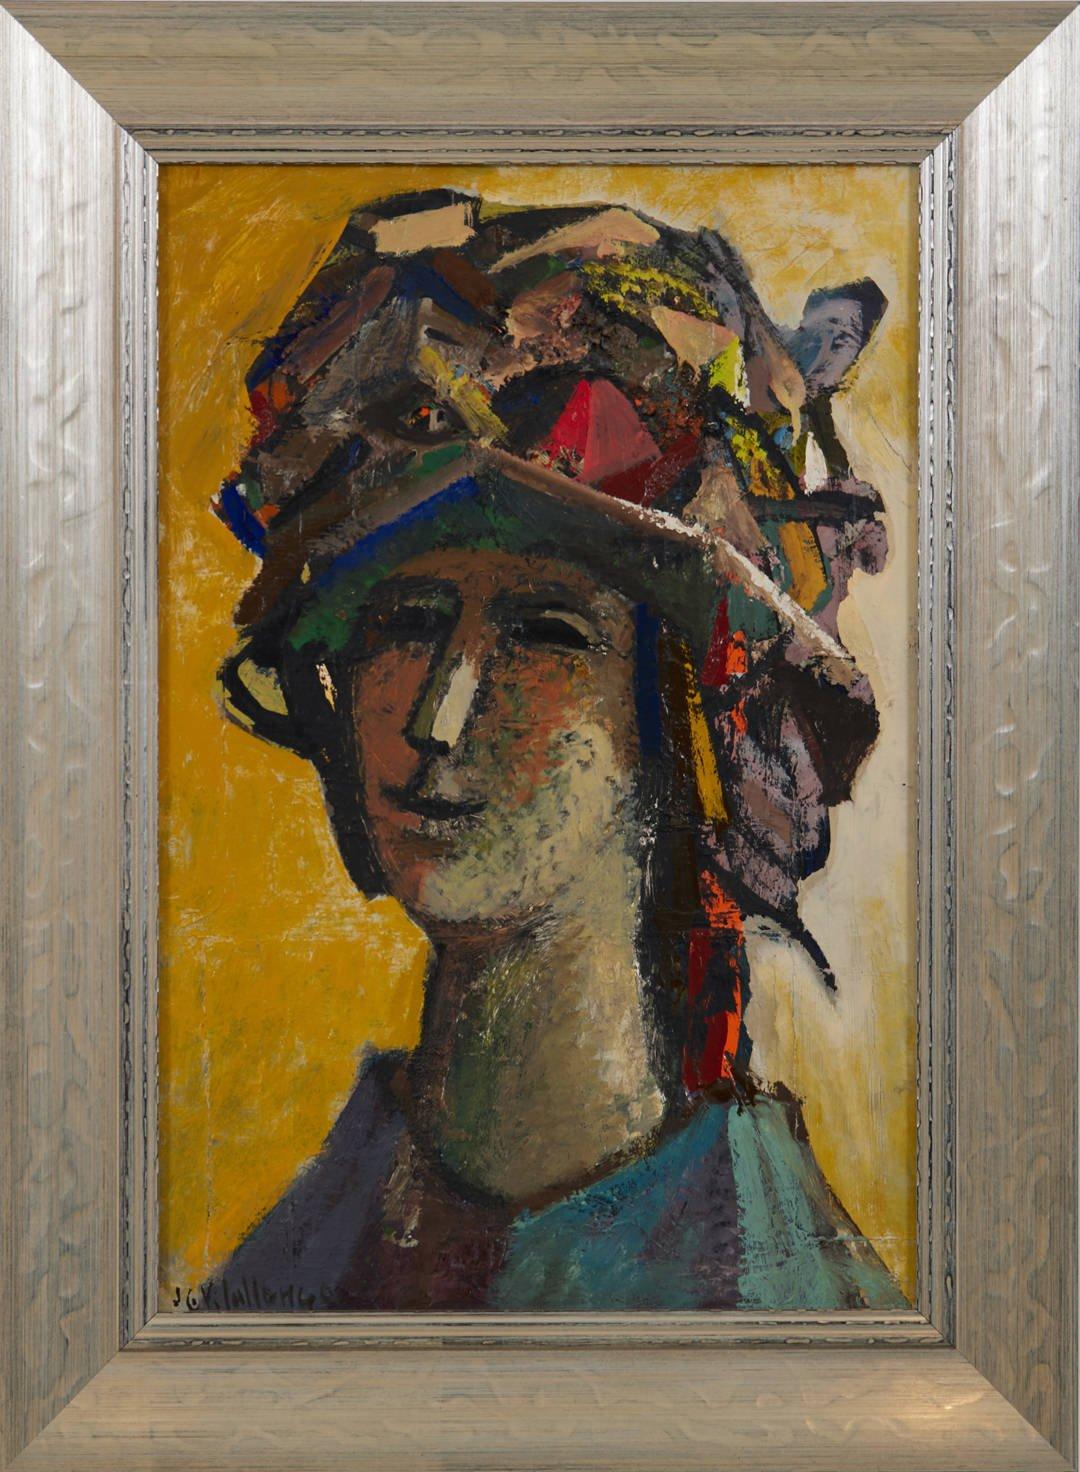 Jesus C. Vilallonga (Canadian, 1927-2018)
Femme au Chapeau
Oil on canvas
Signed lower left
24 x 16 inches
30 x 21.75 inches, framed

Jesús Carles de Vilallonga was a Spanish/Canadian figurative artist who worked primarily in the medium of egg